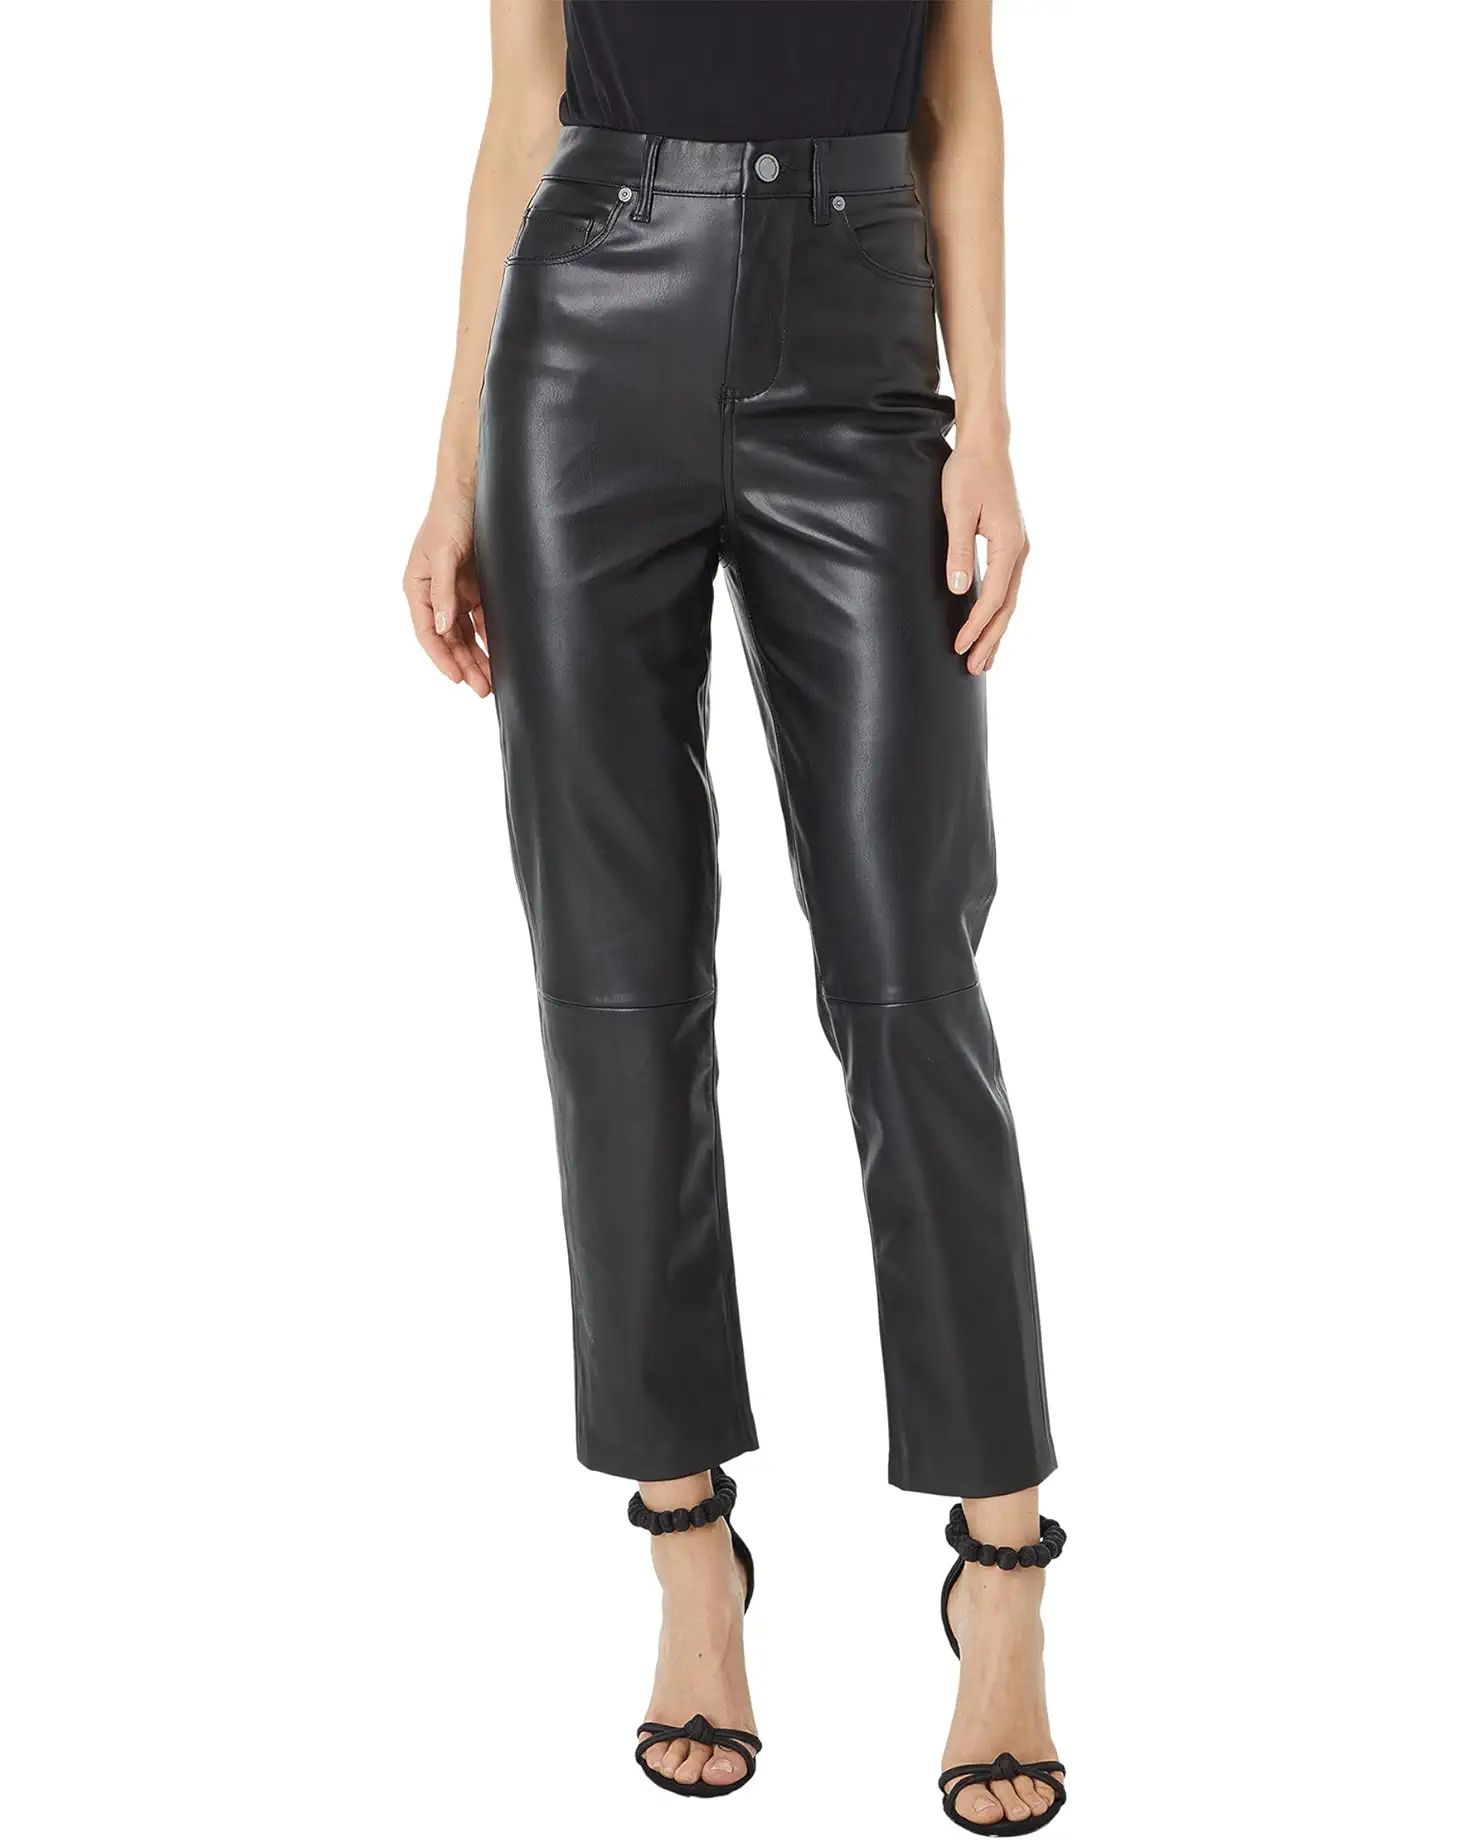 Need You Tonight - Leather Five-Pocket High-Rise Pants | Zappos